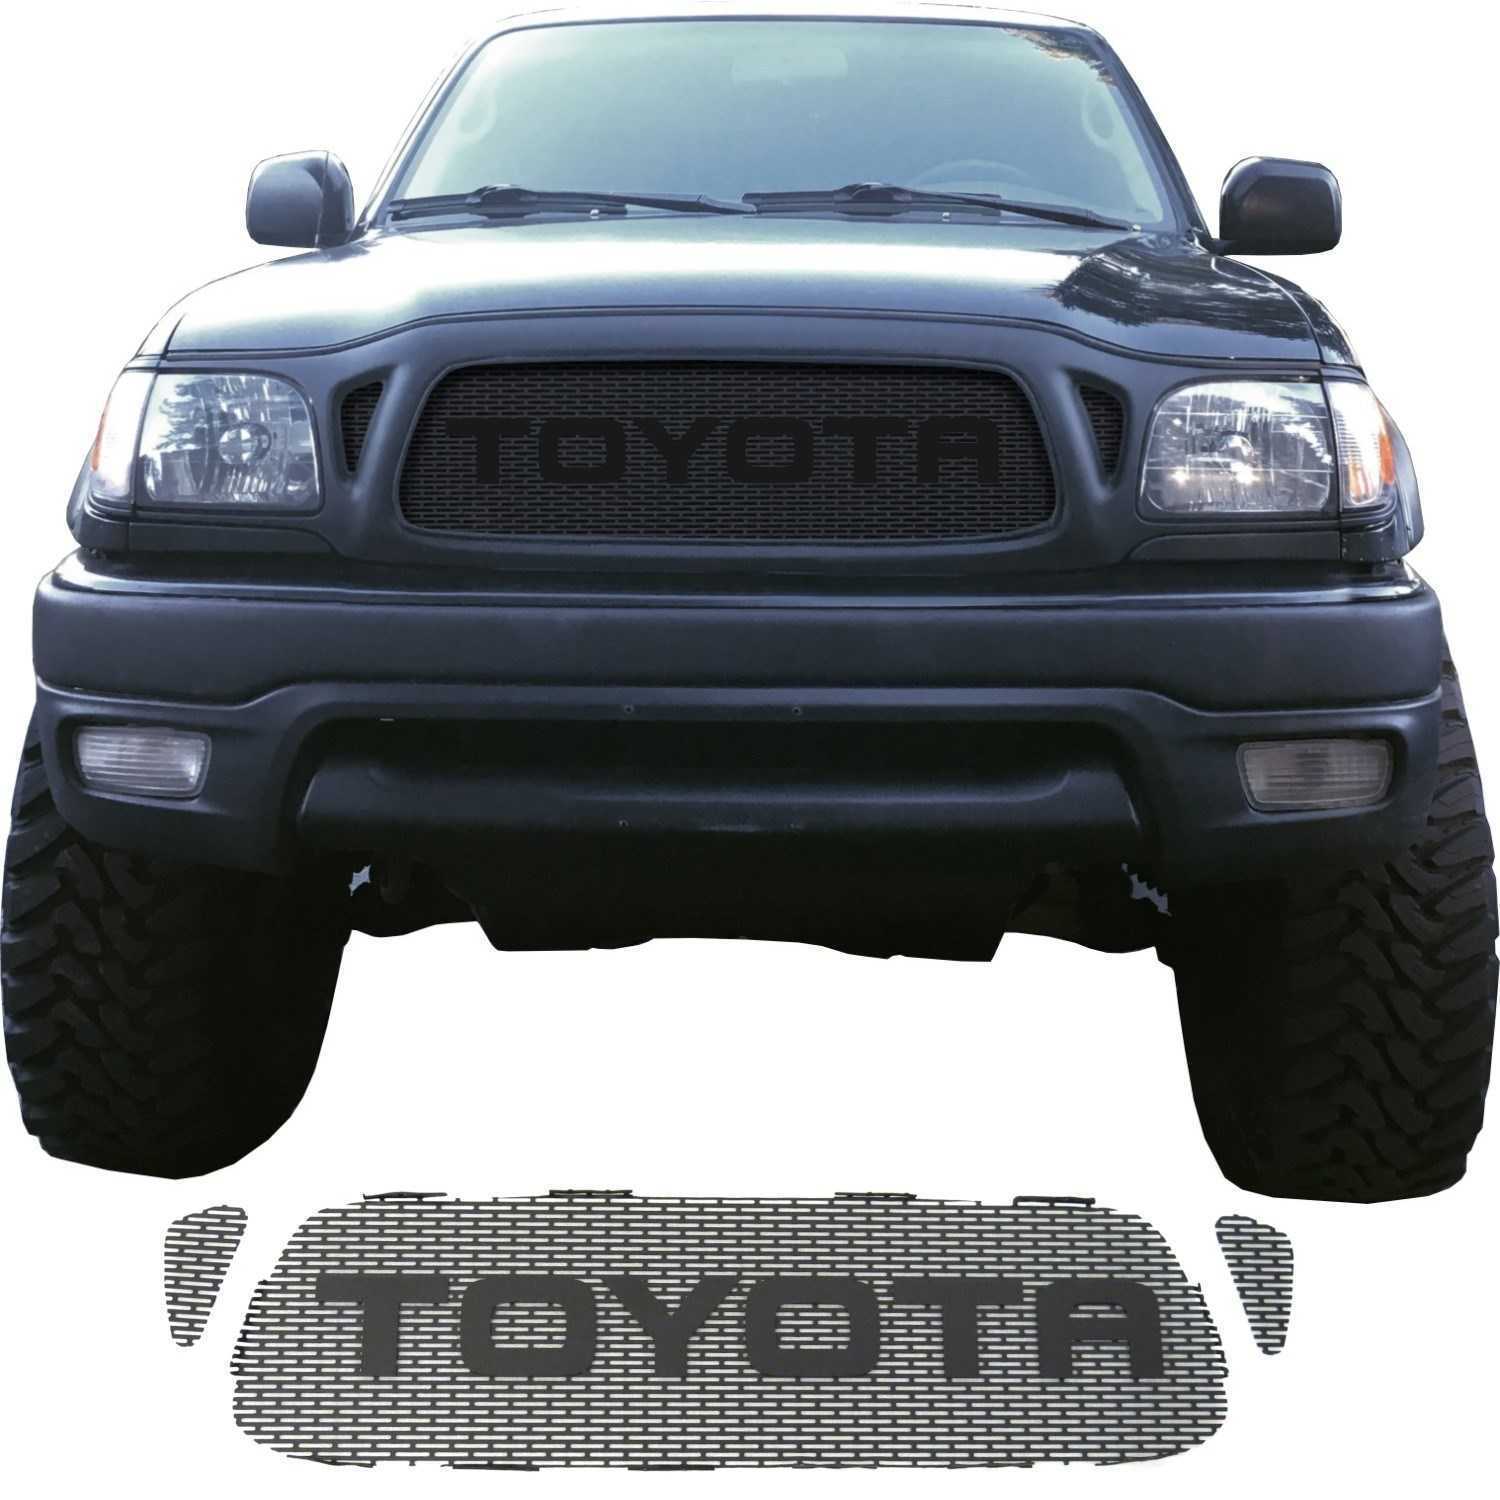 2001 - 2004 Toyota Tacoma Grill Mesh With Rounded Letters